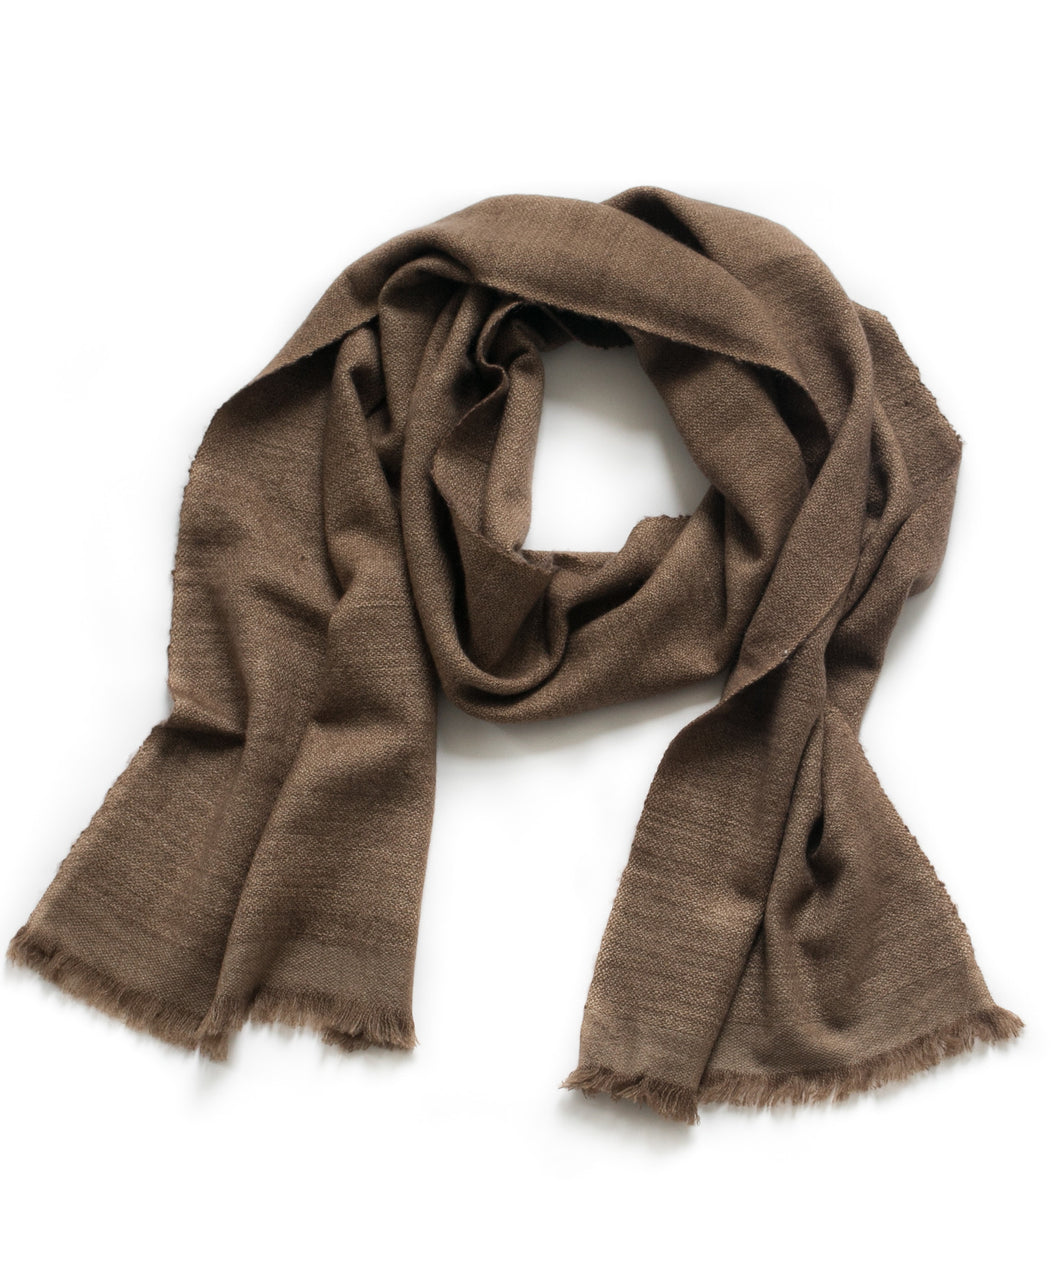 Hand Knitted Cashmere Scarf from Nepal in Whole Sale Price